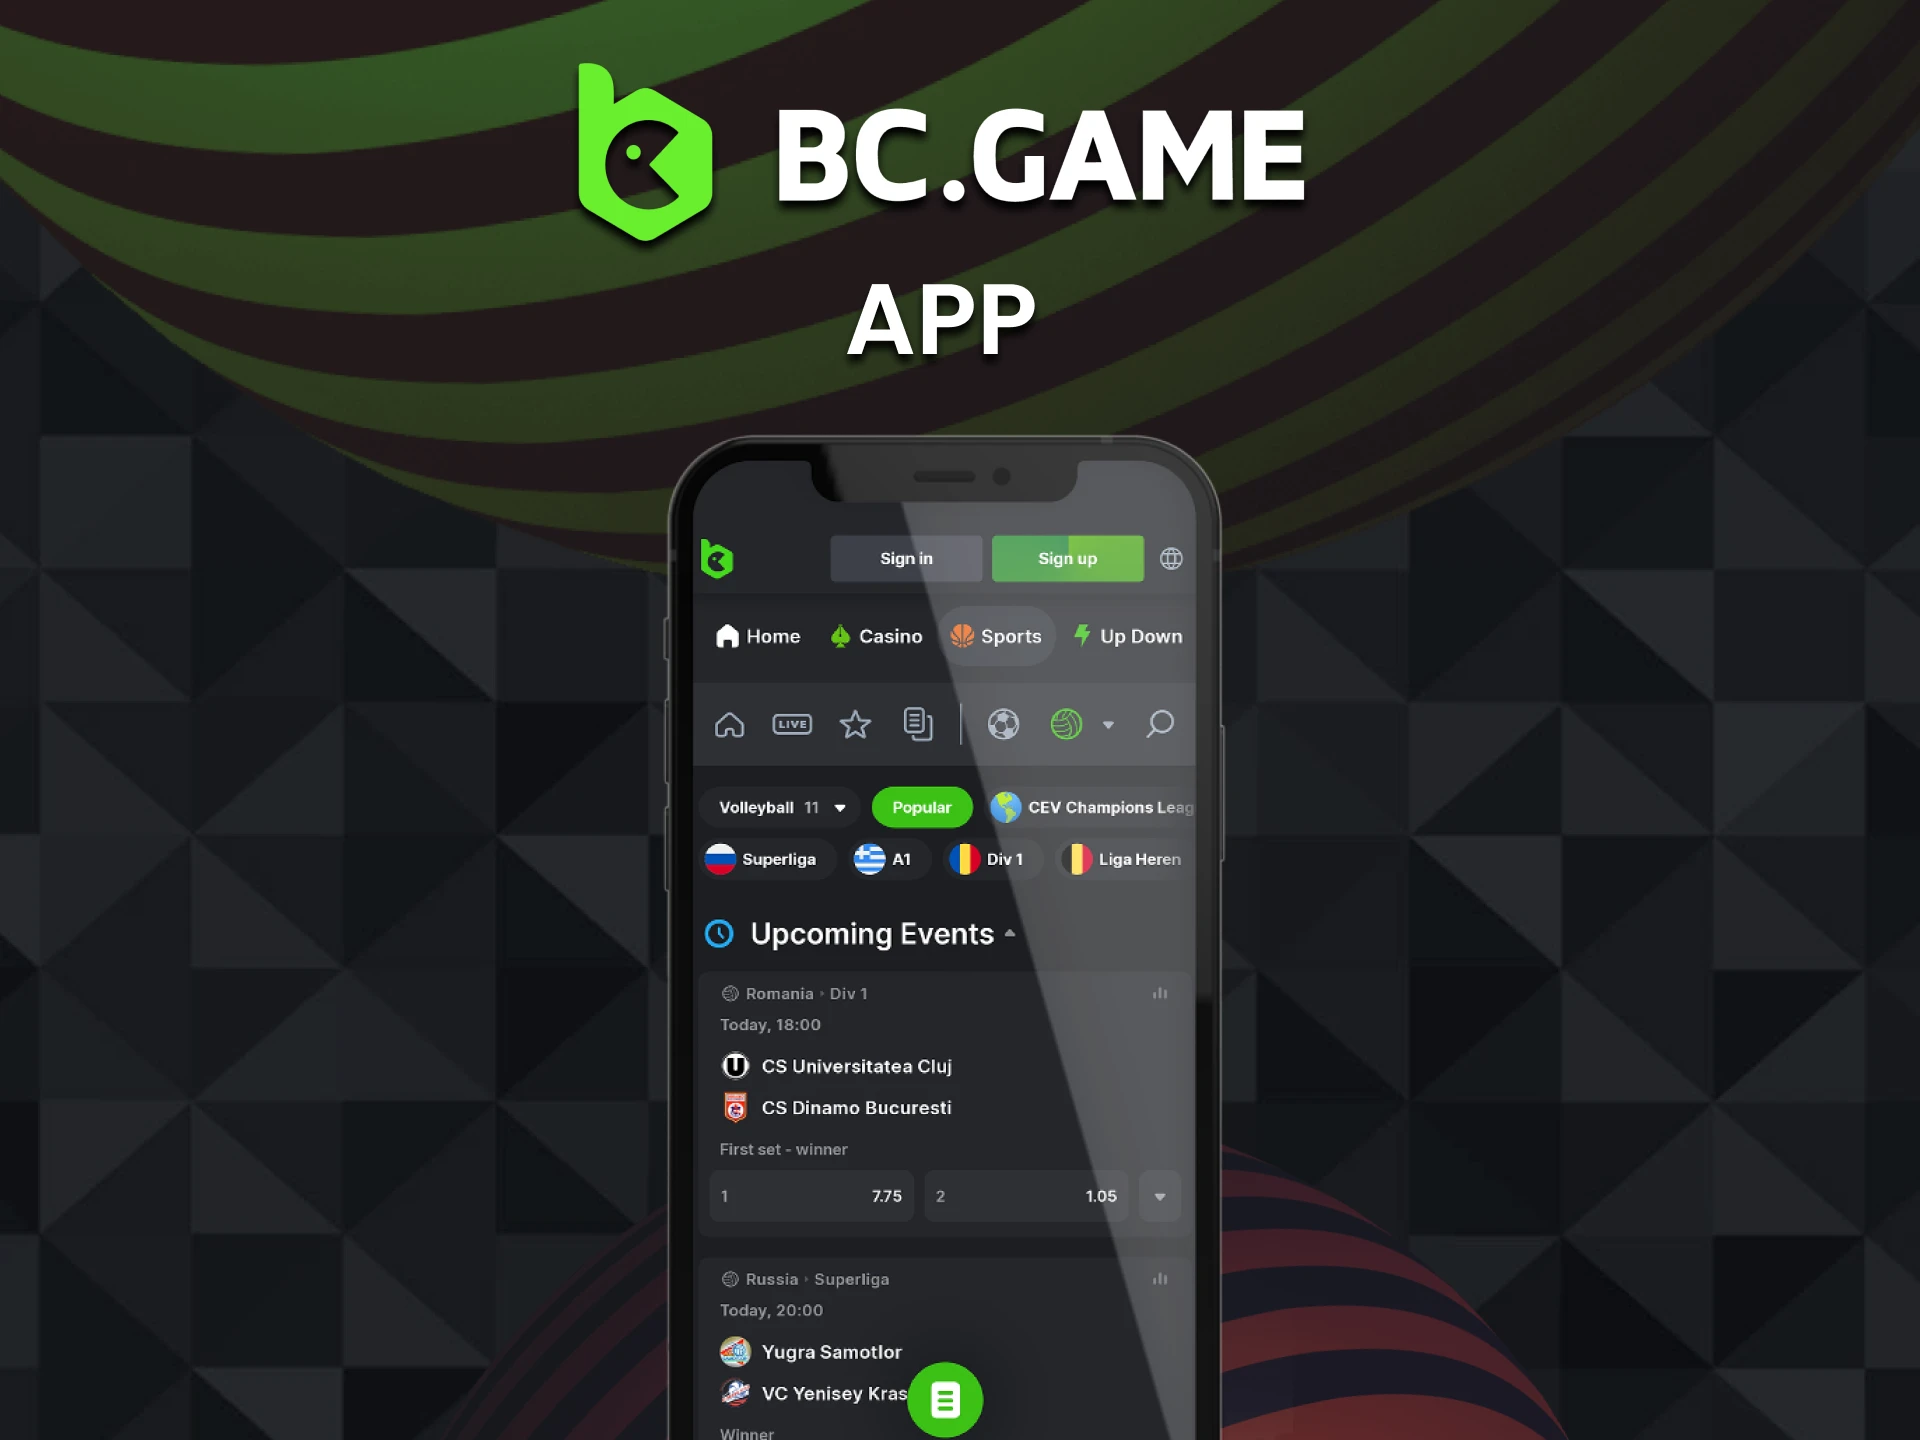 You can place bets on volleyball using the BC Game app.